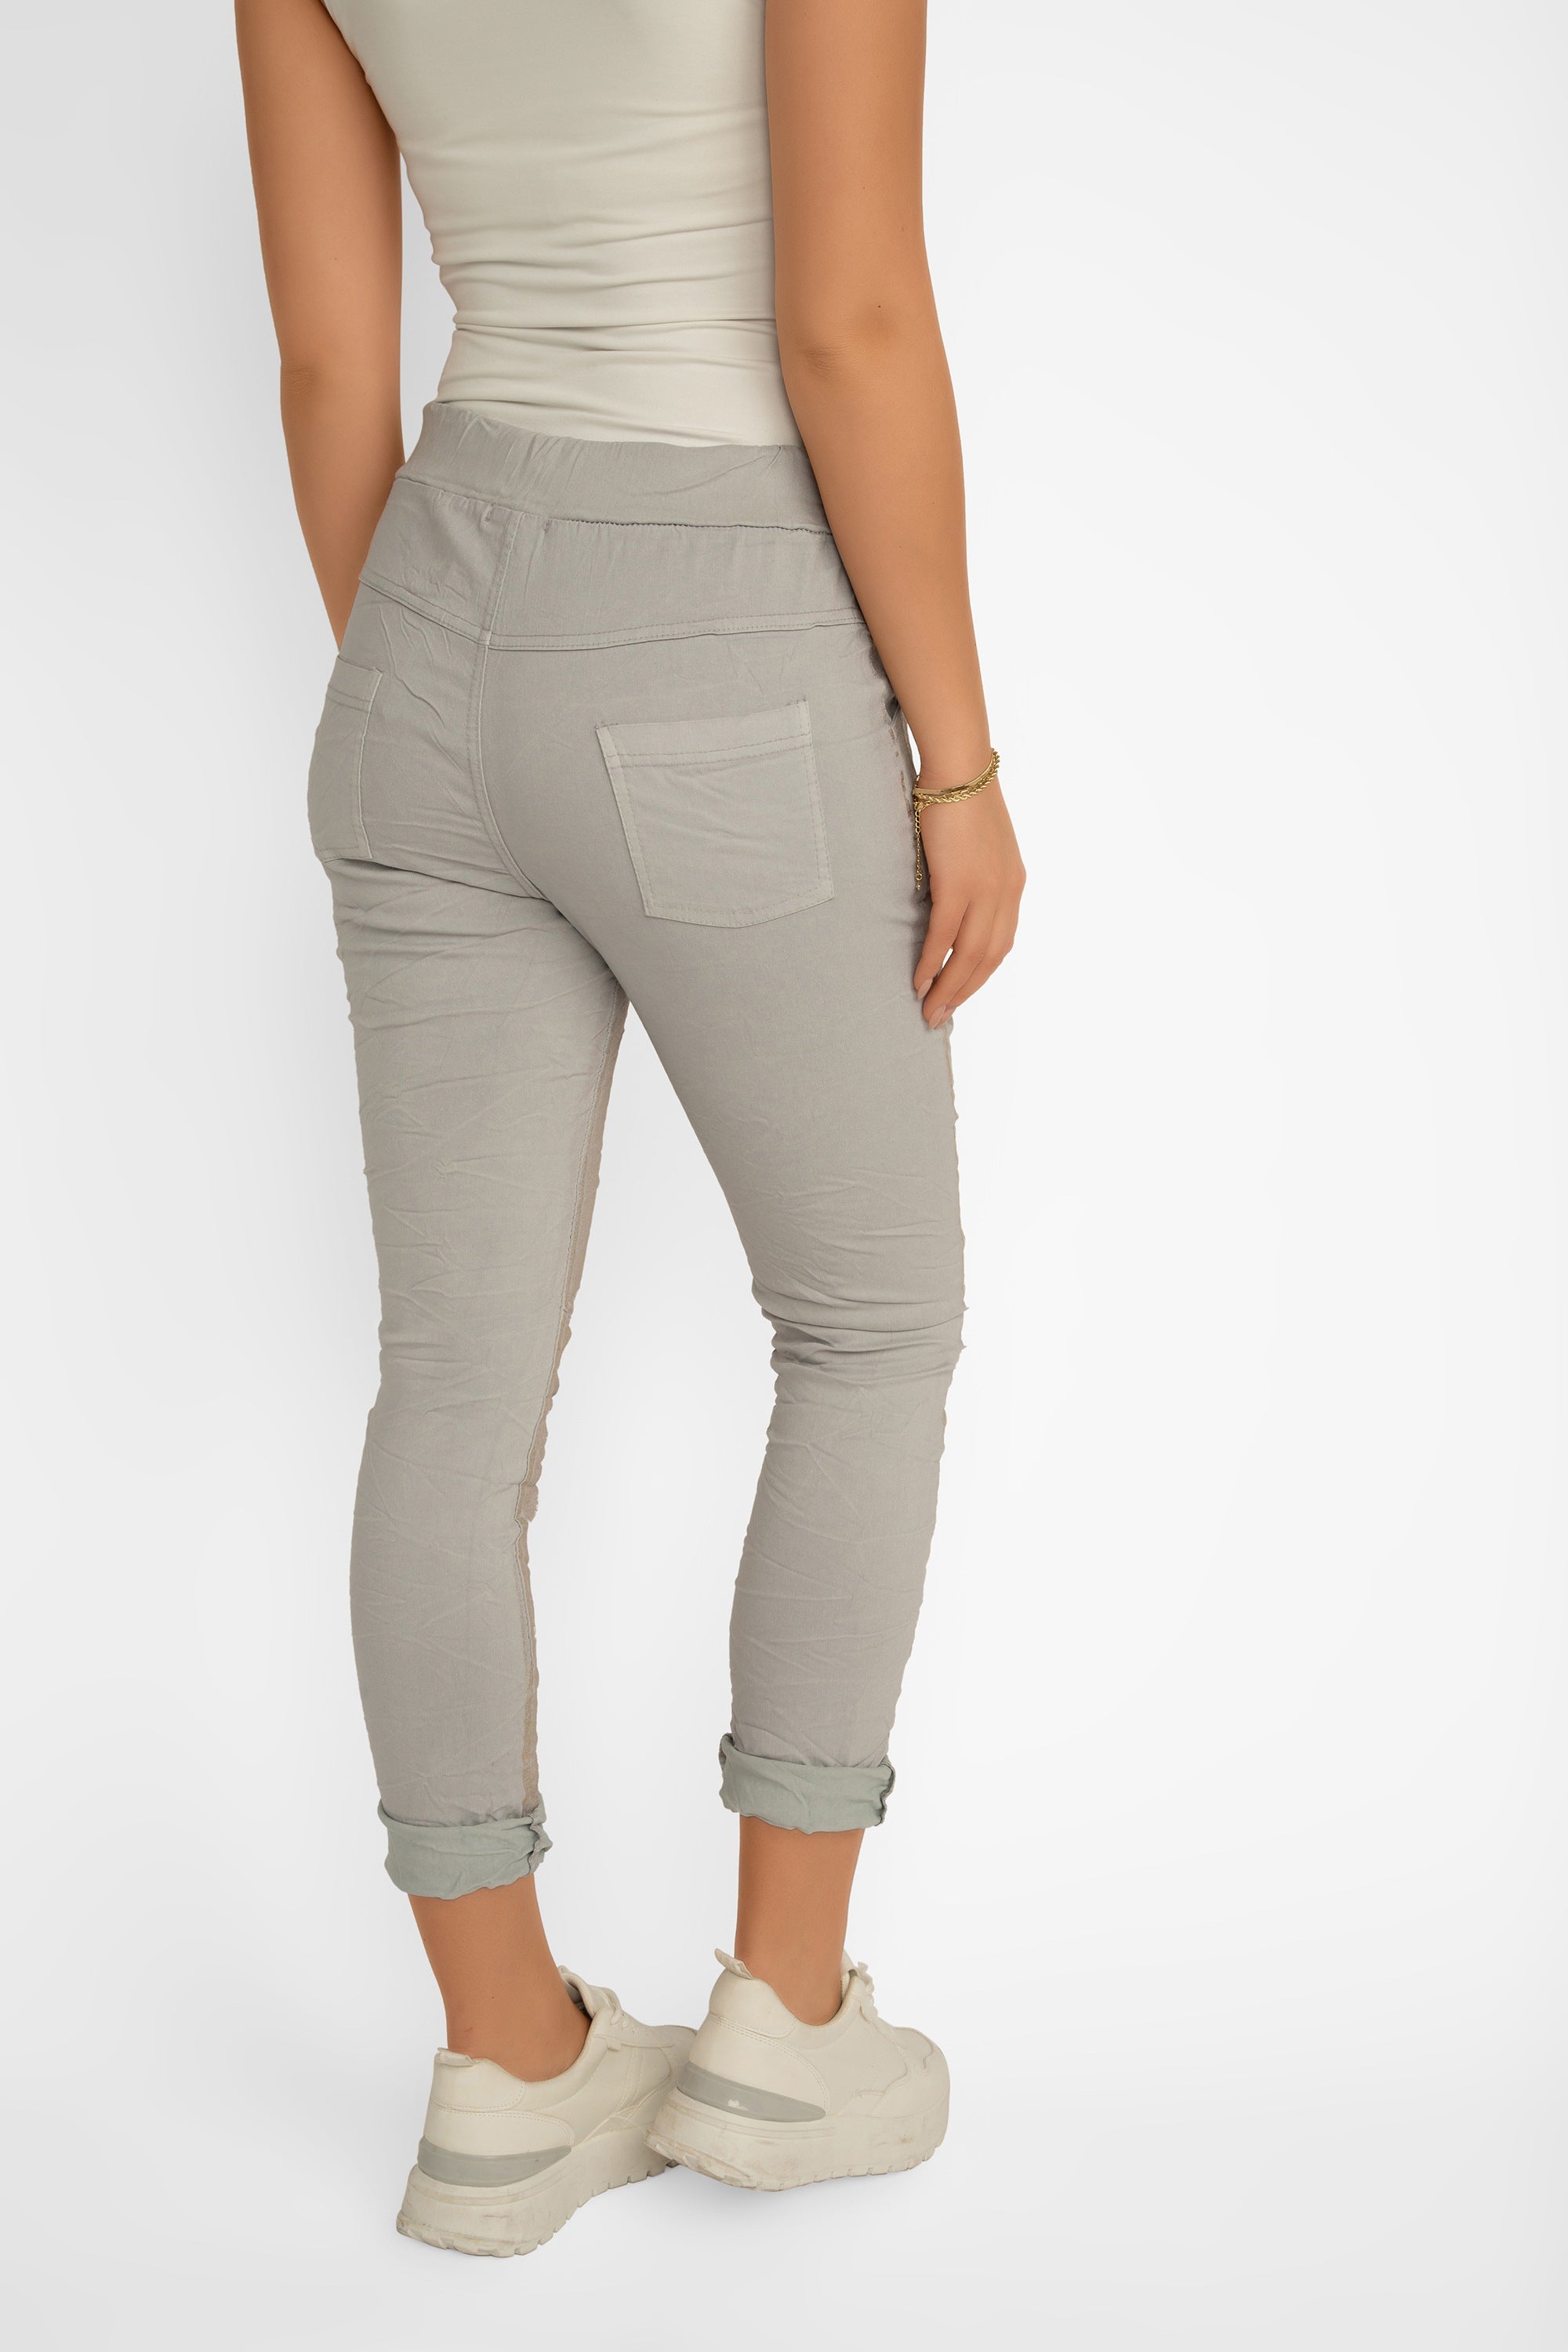 Back view of Bell Amore (21258) Women's Cropped Slim Fit, Metallic Coated Pull On Pants with Pockets in Light Grey with Gold foil